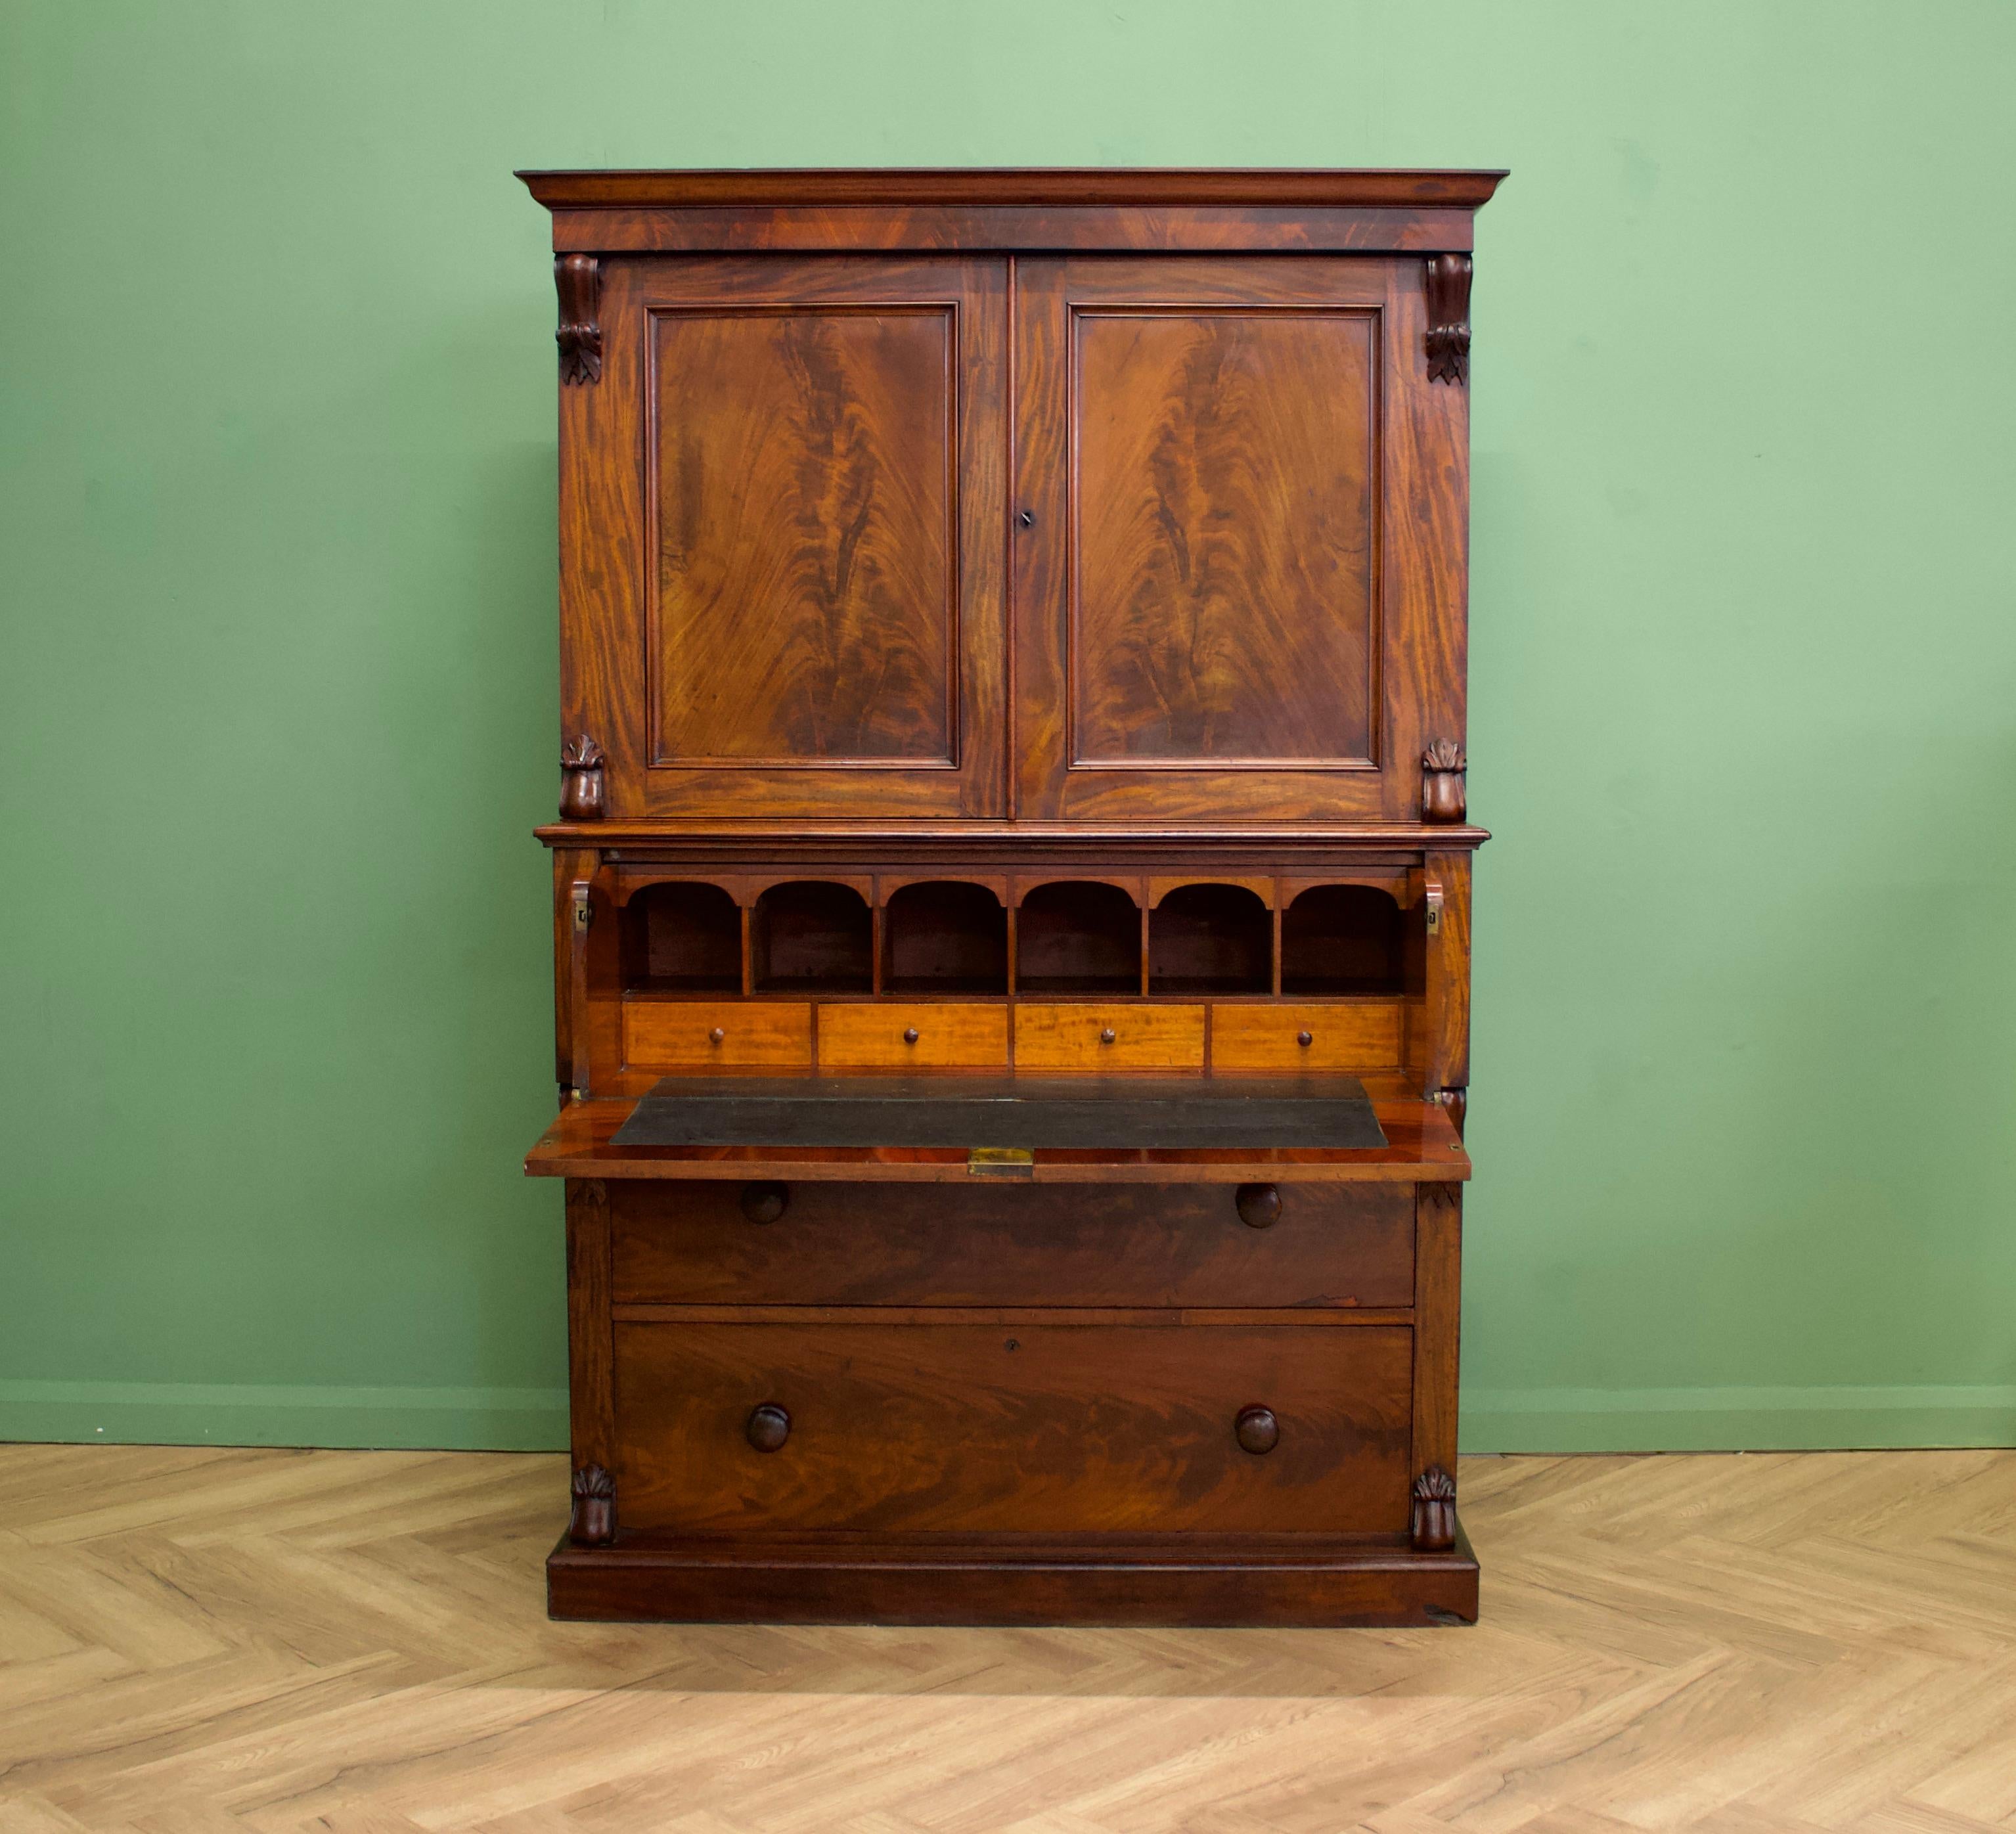 A late Georgian/early Victorian secretaire bookcase
There's a lockable cupboard to the top
A pull out desk with internal drawers and compartments
Two additional drawers to the bottom.